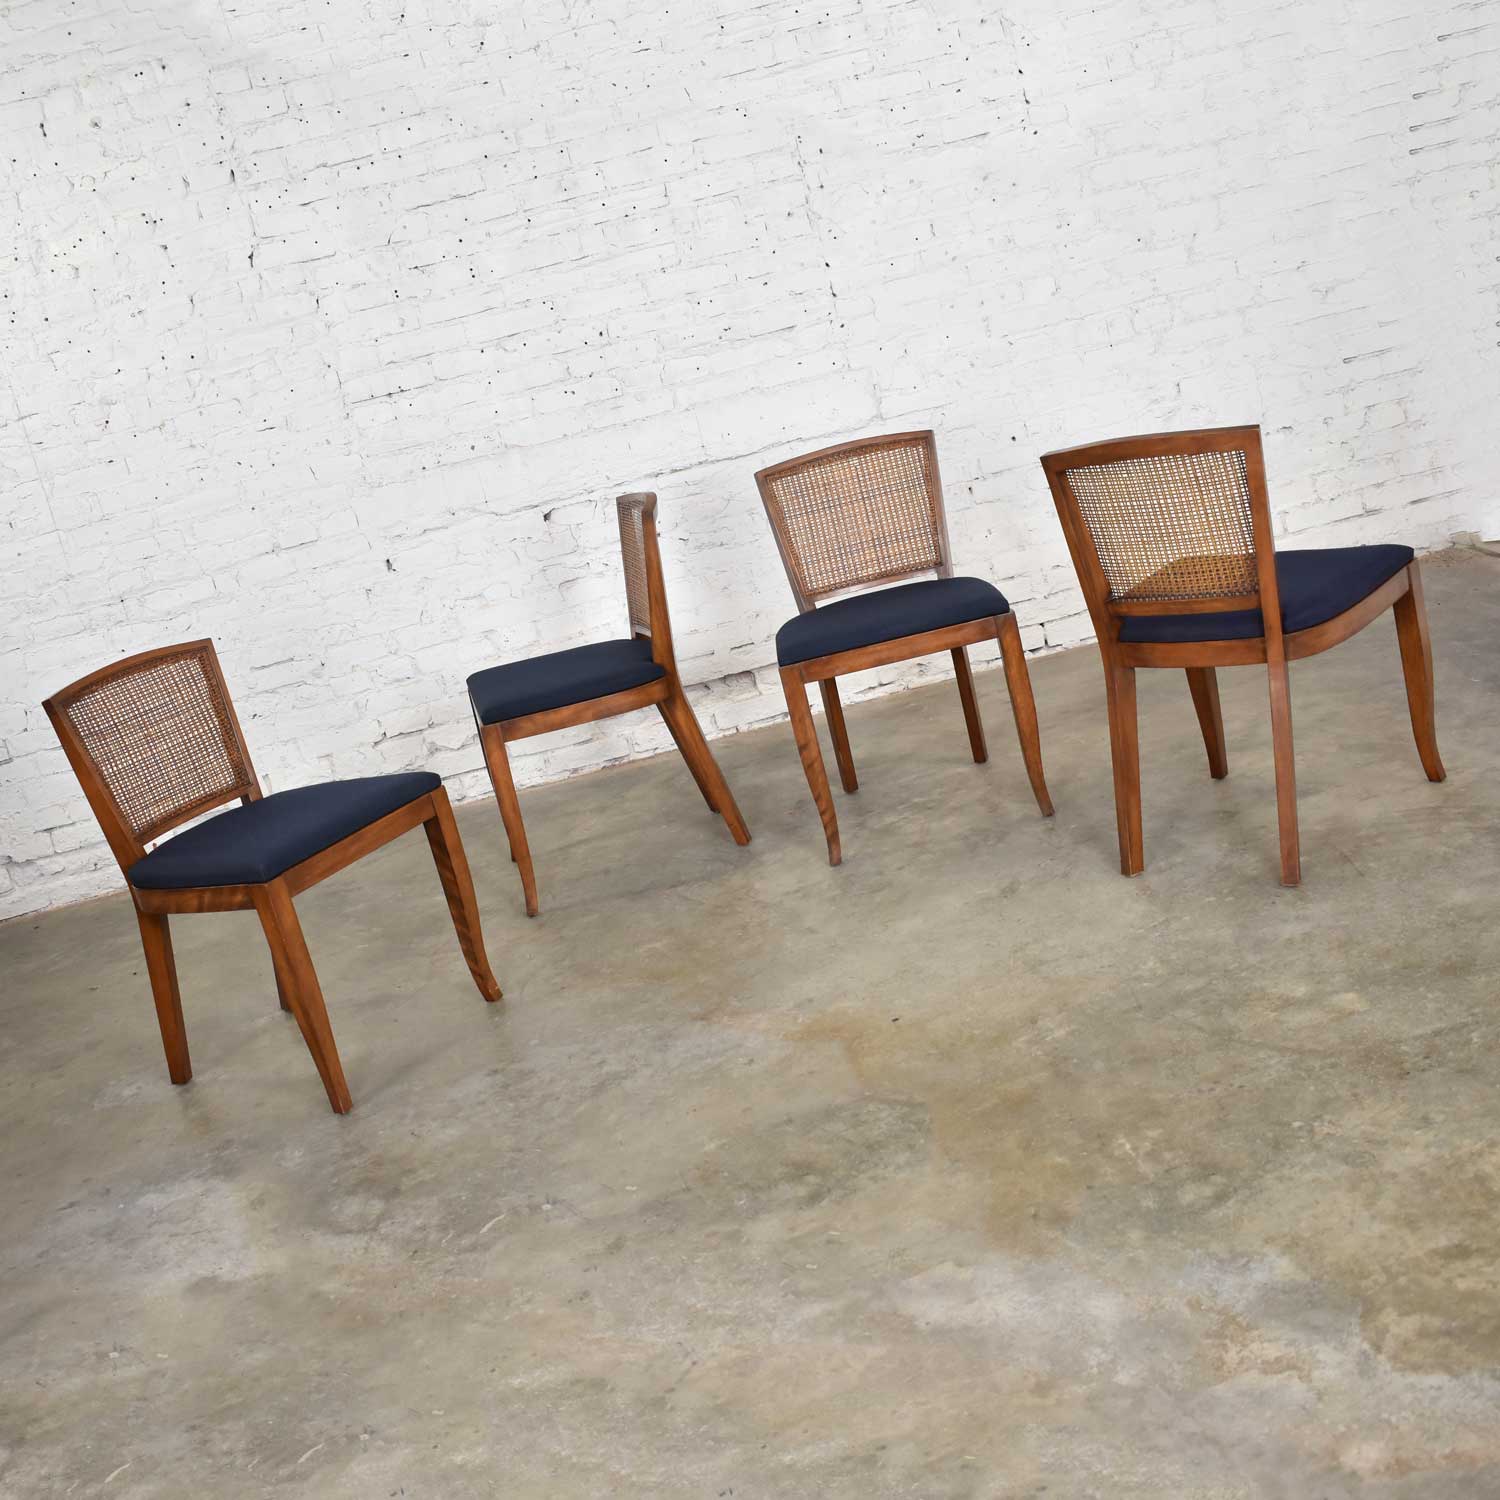 Vintage Mid-Century Modern Set of 4 Cane Back Dining Chairs Newly Upholstered Seats